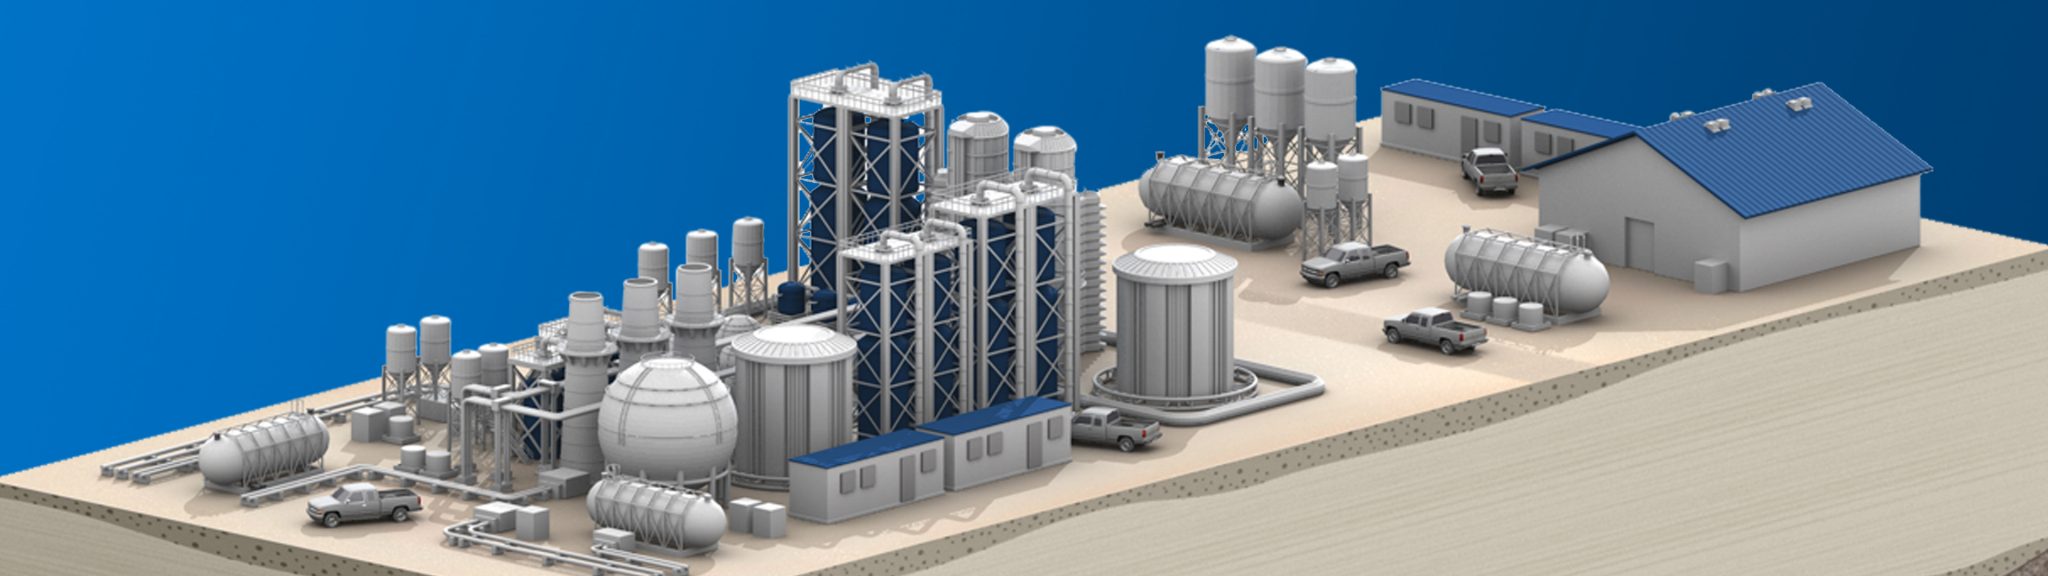 A rendering of a natural gas processing pant